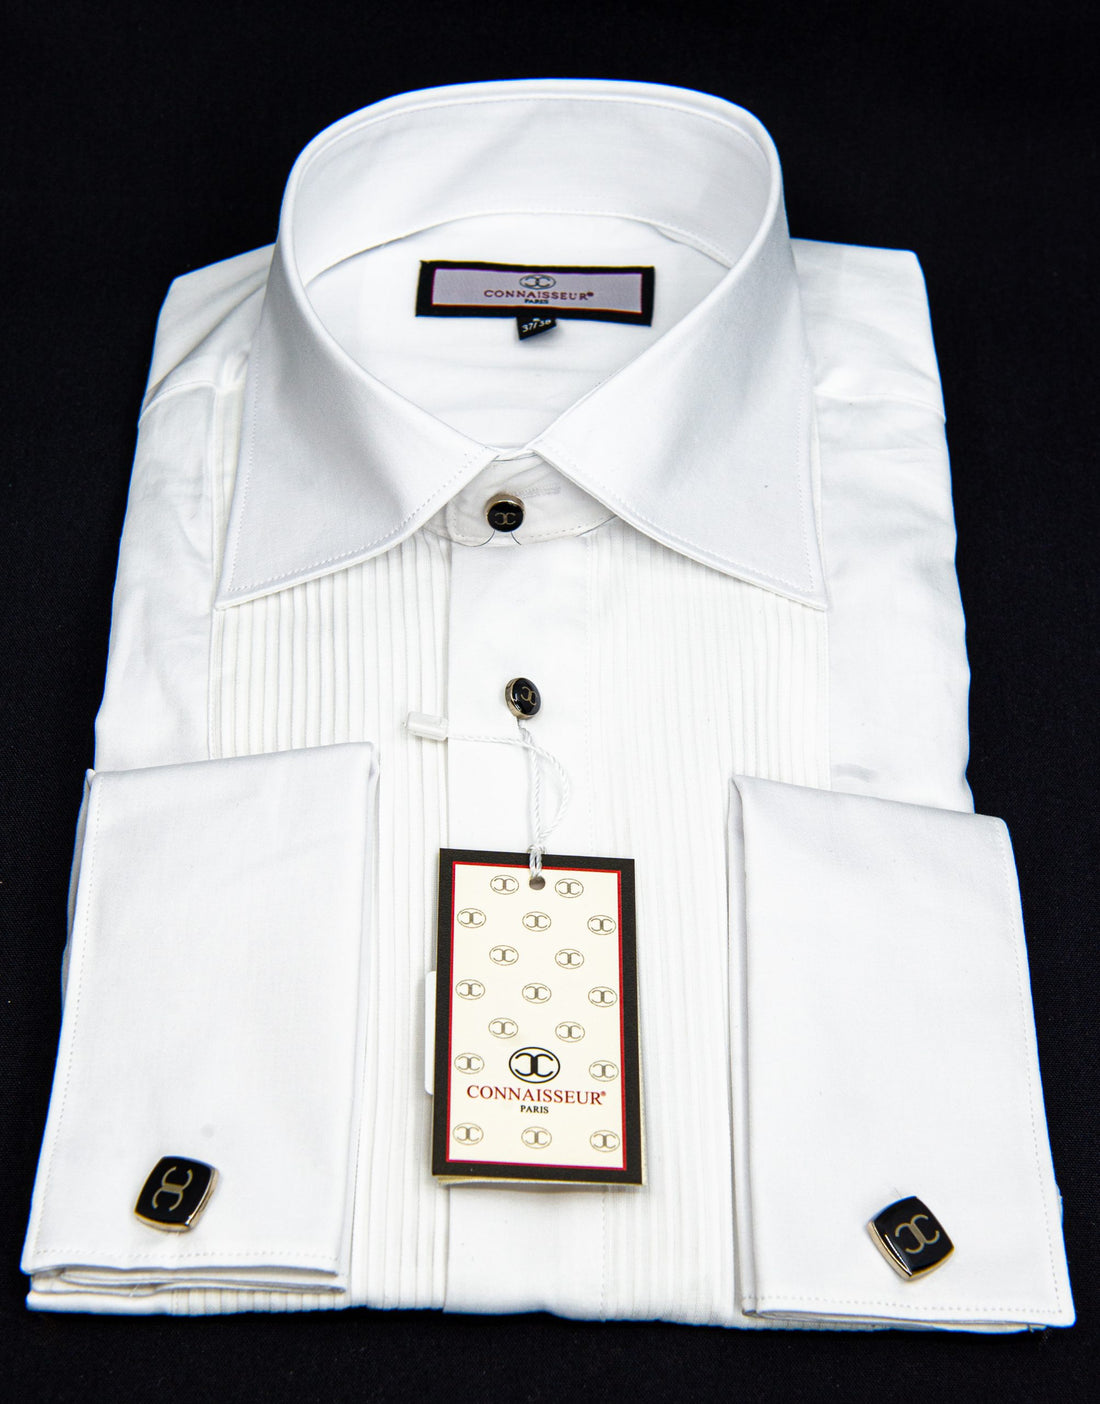 Ceremonial - White ceremonial chest pleated Slim Fit dress Shirt with and black stone buttons